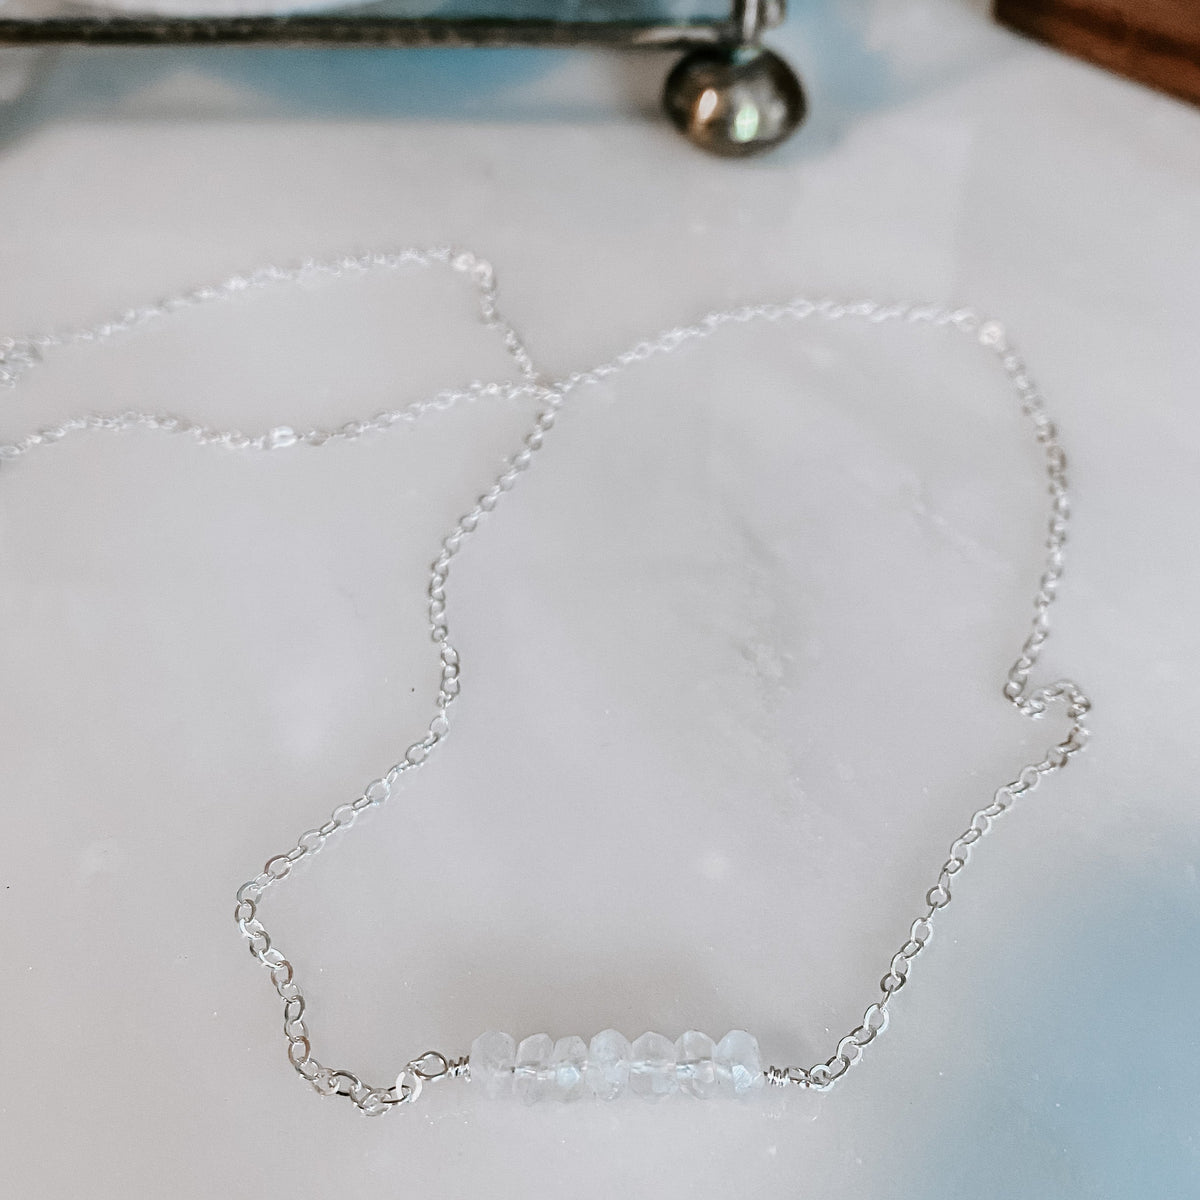 Dainty Moonstone Necklace (WS)